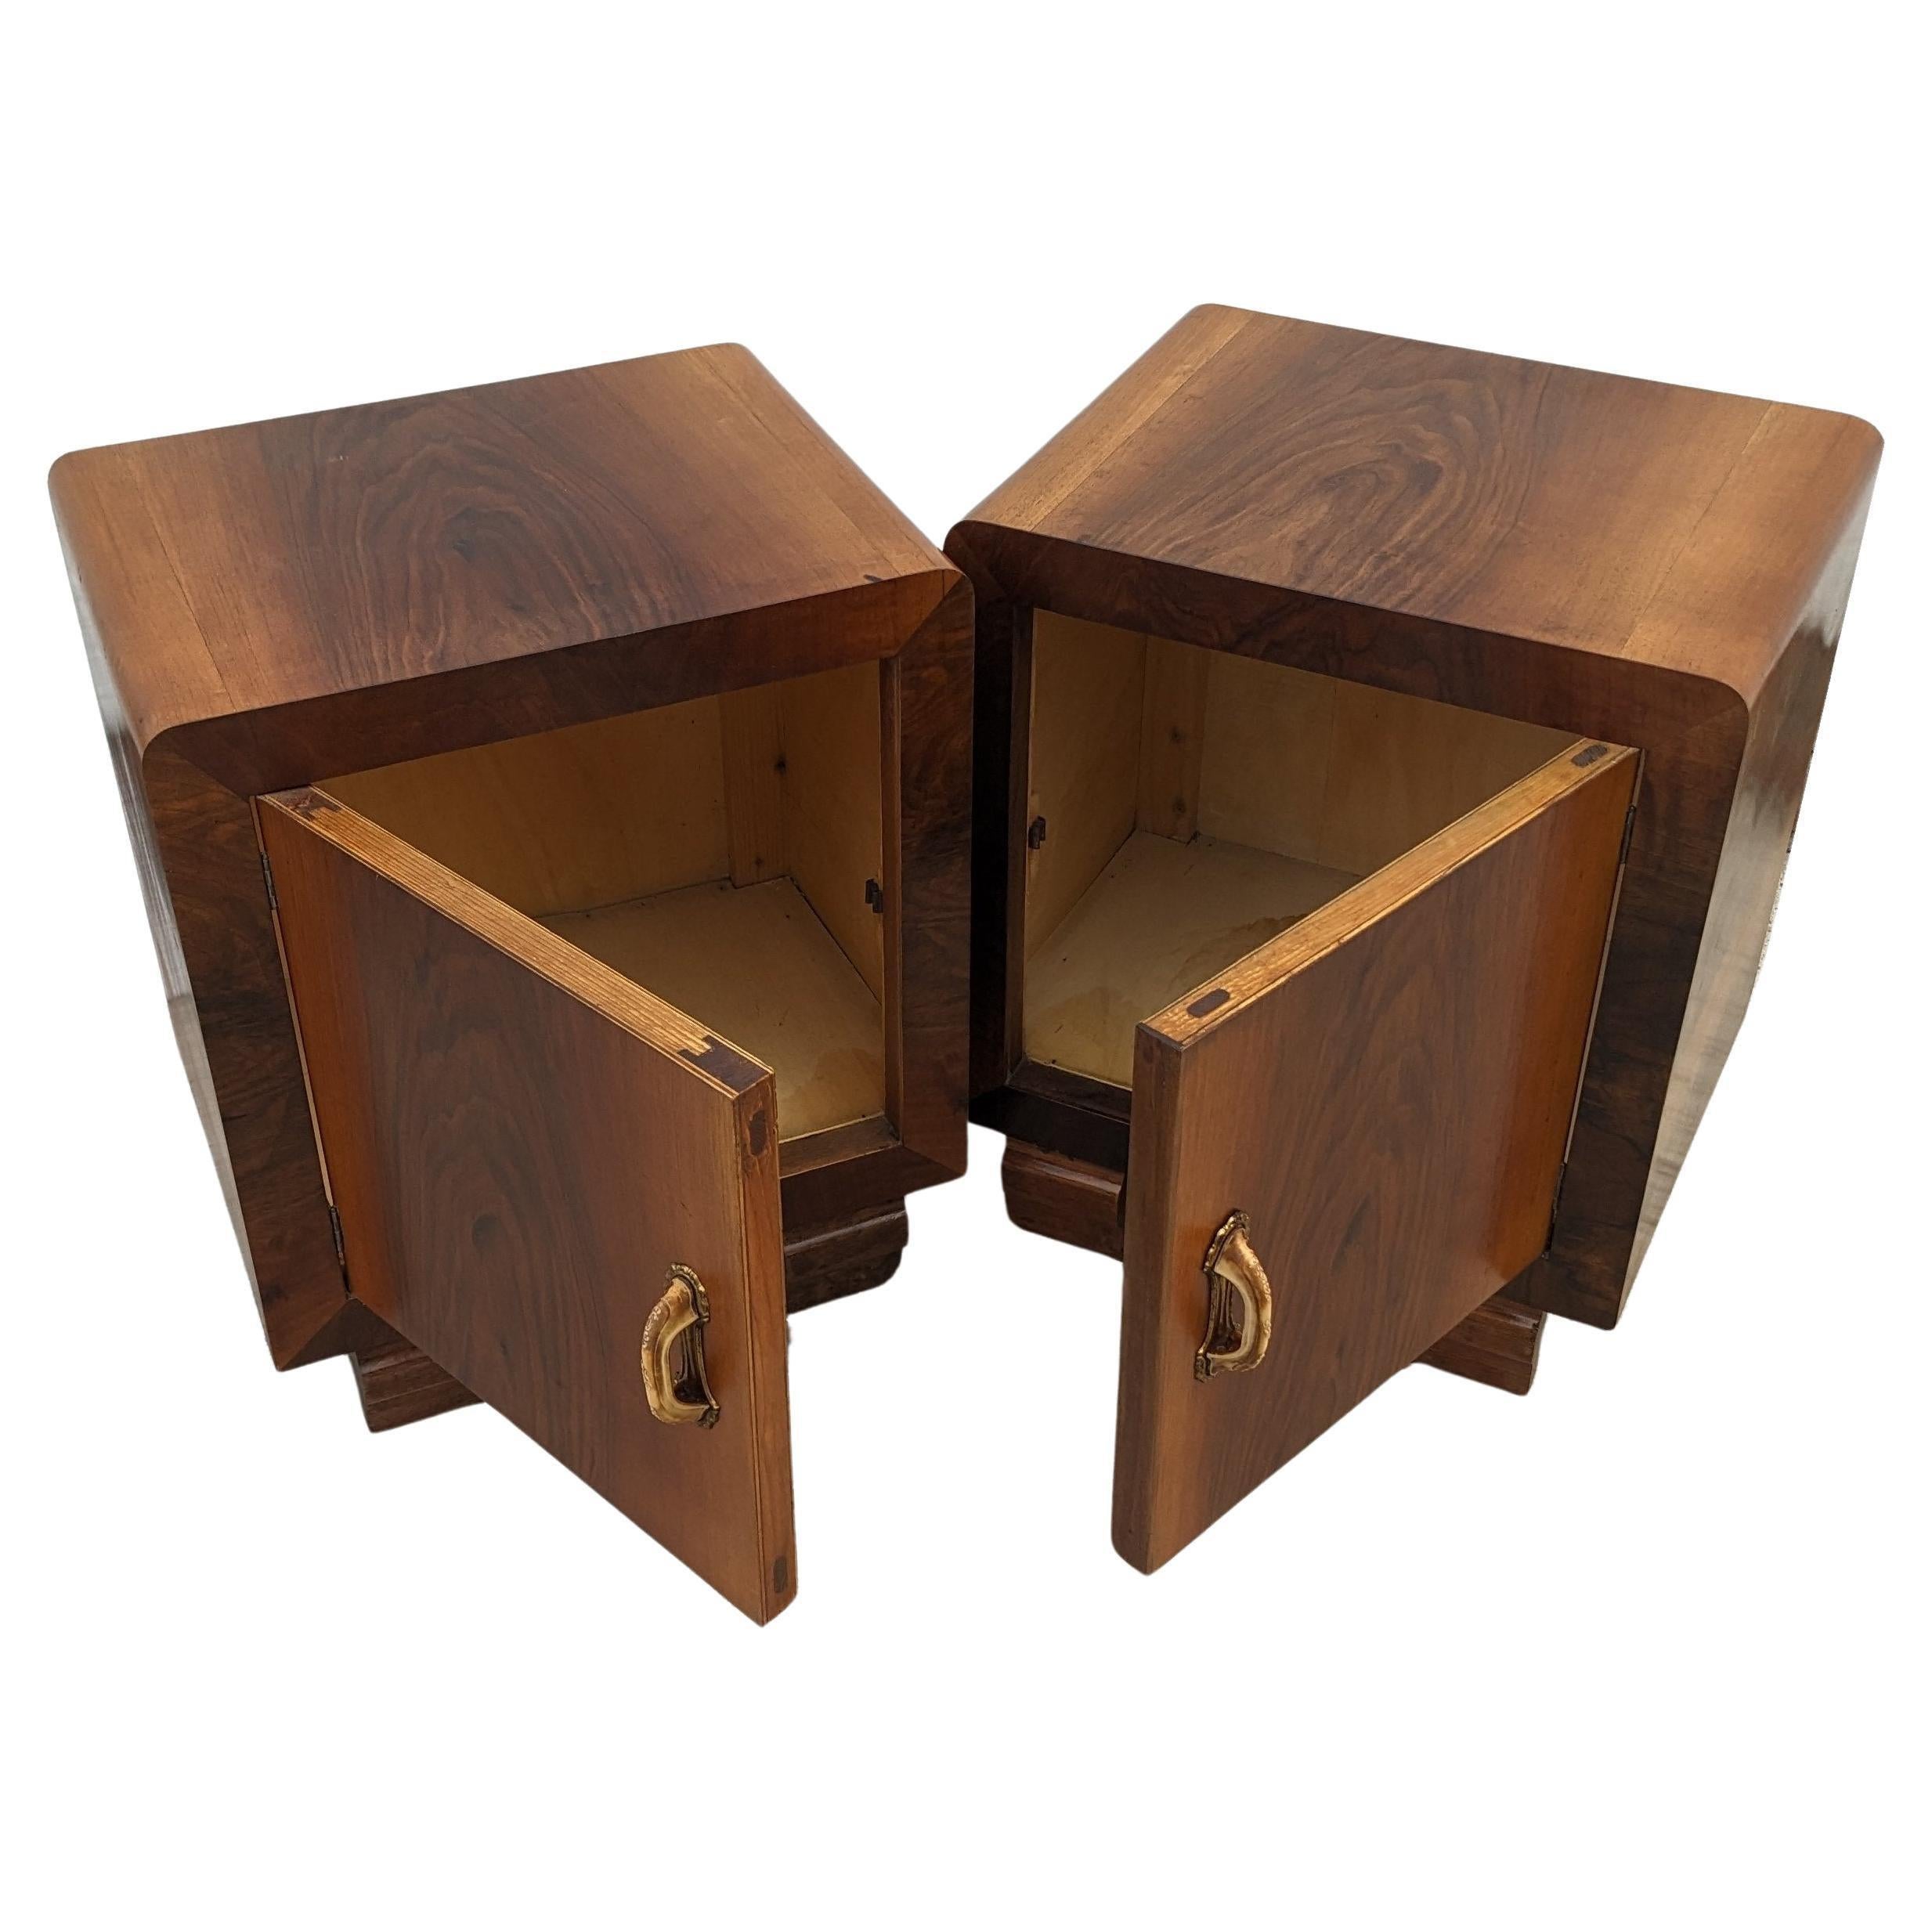 Brass Art Deco Modernist Pair Matching of Italian Bedside Table Nightstands, c1930 For Sale